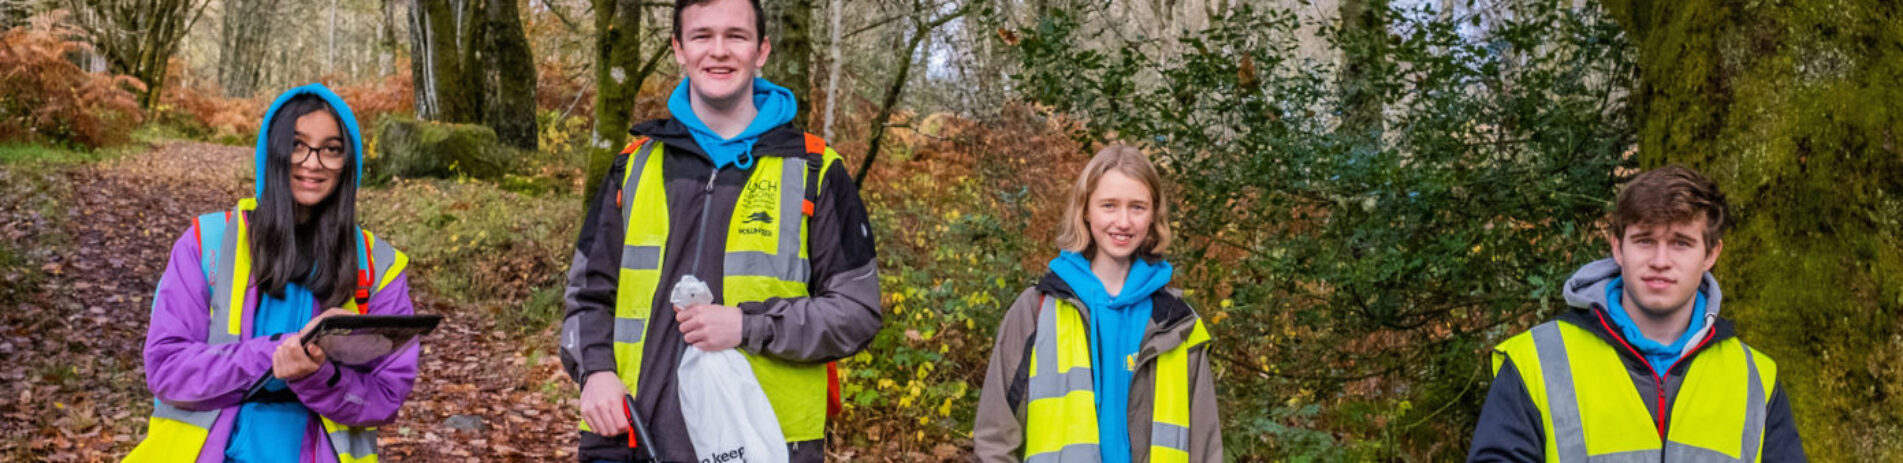 youth-committee-members-litter-picking-in-autumn